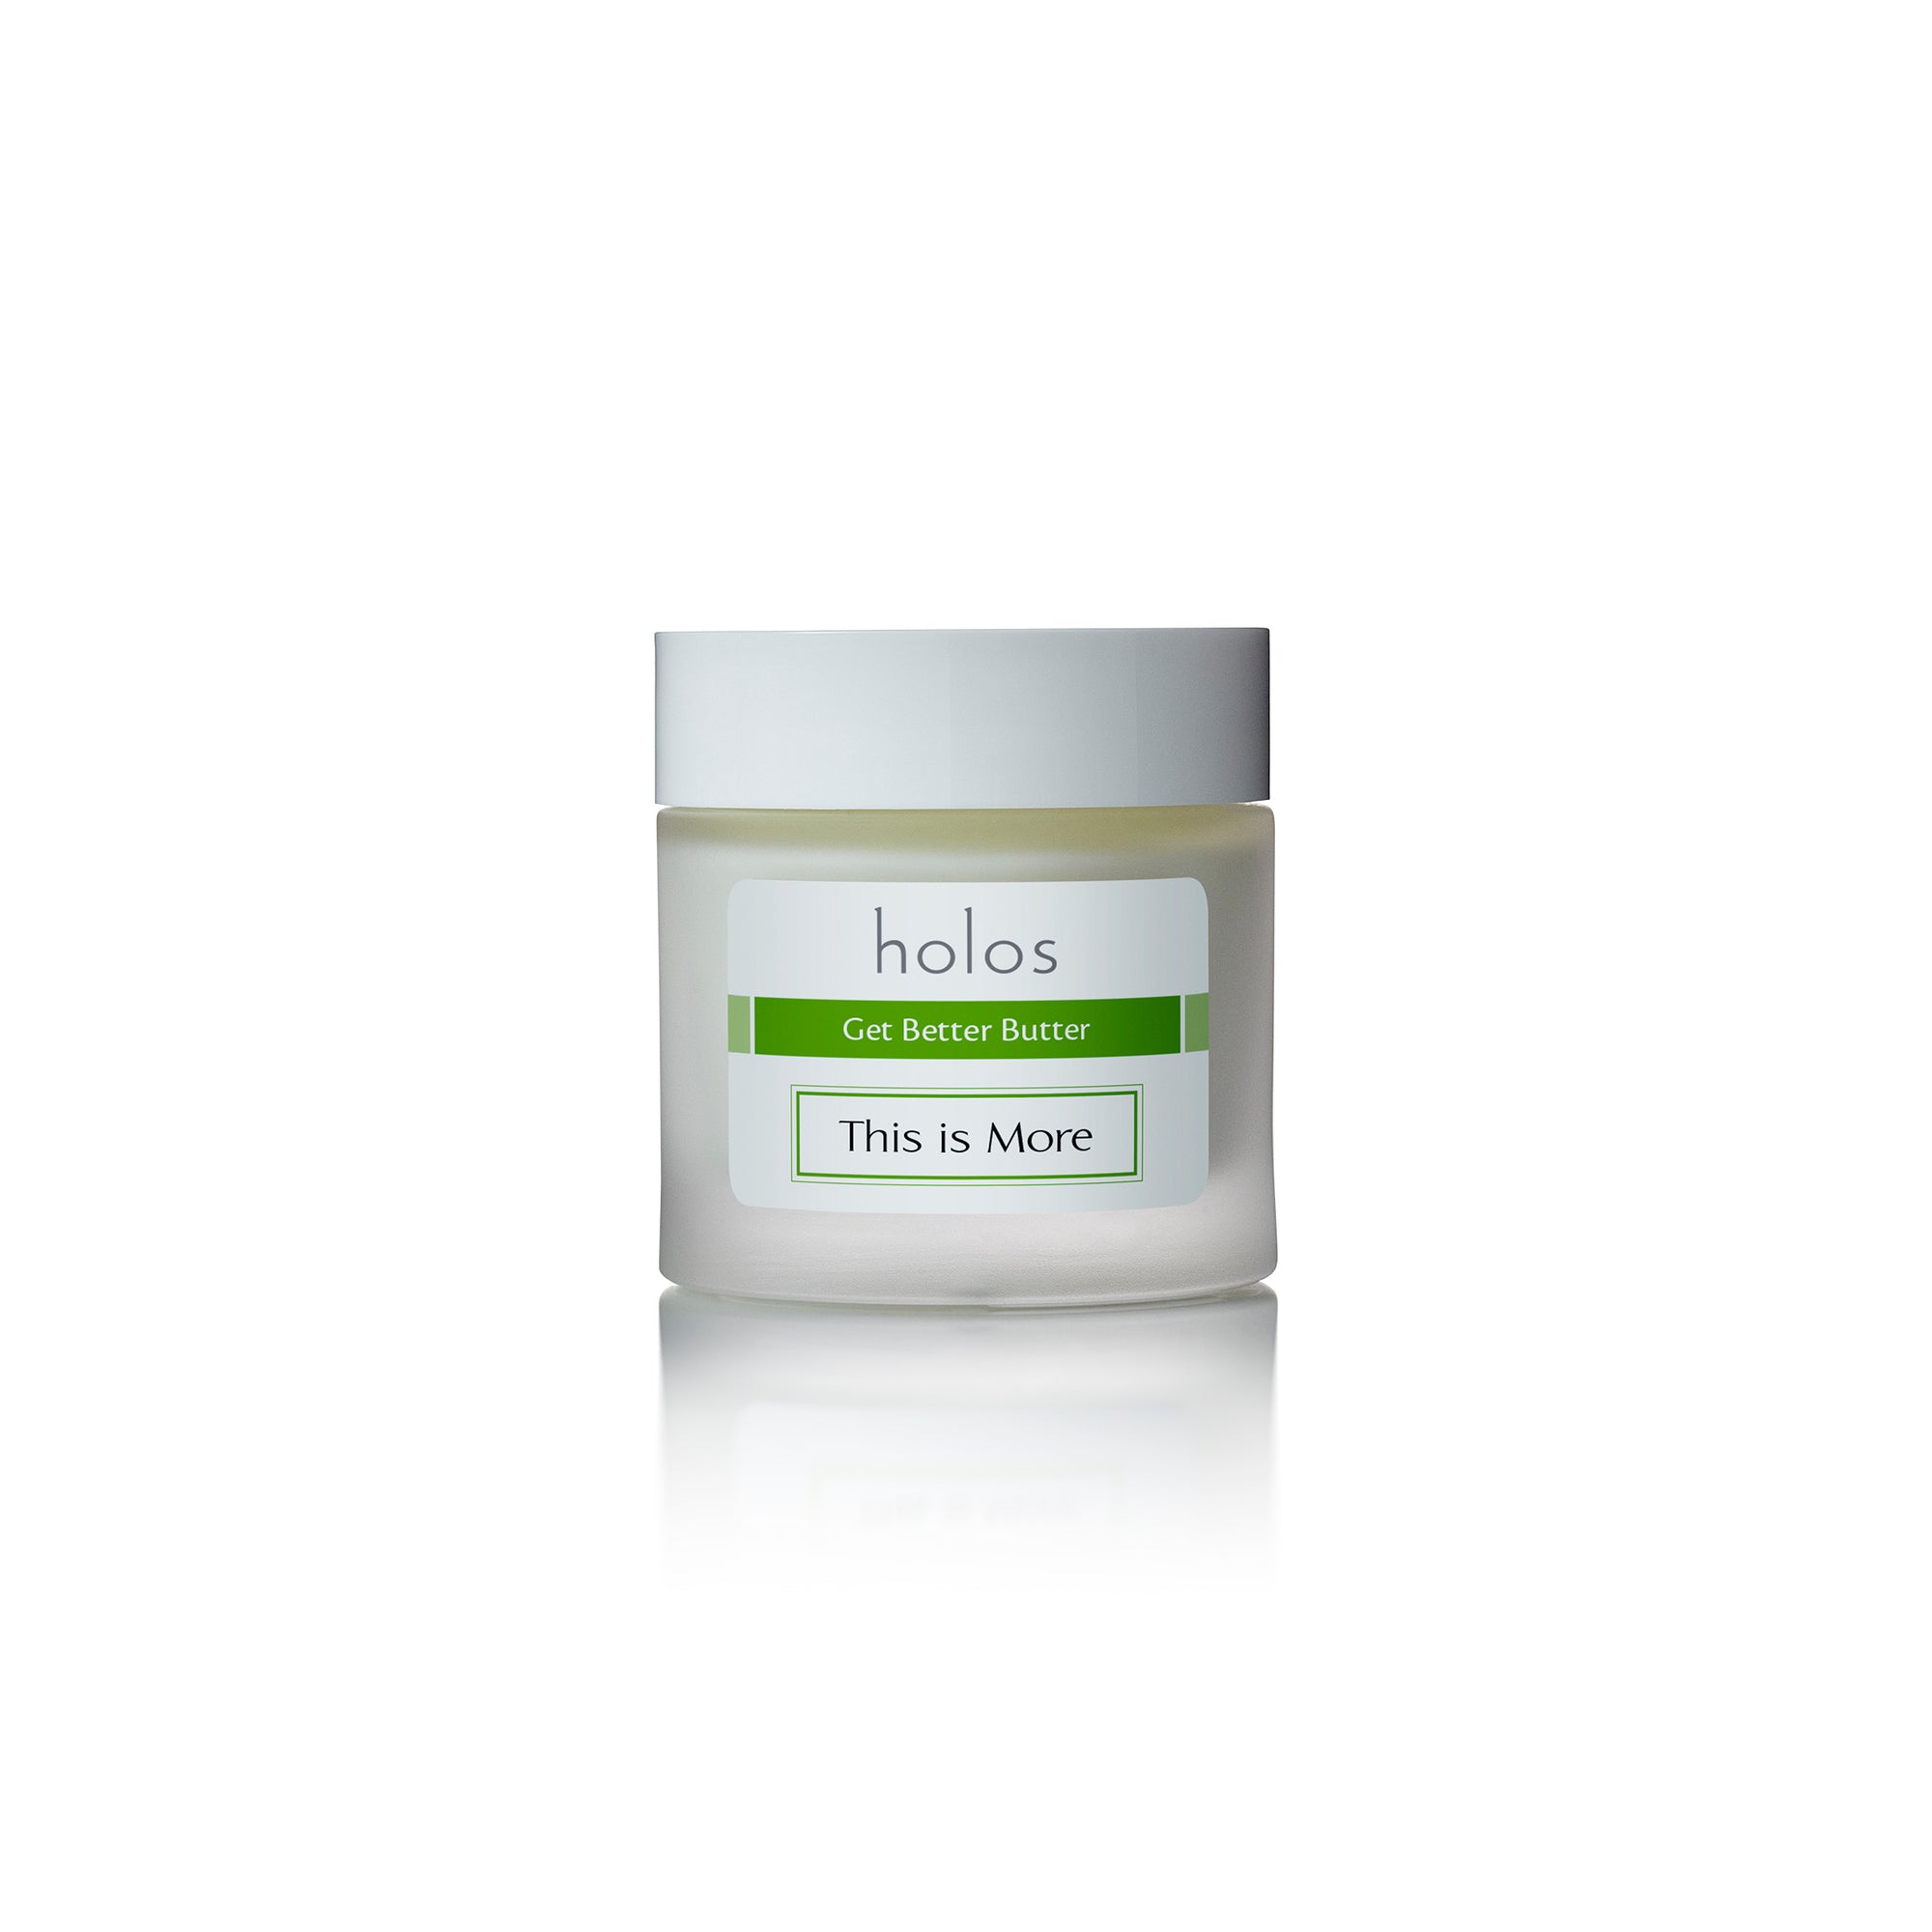 Holos This is More Get Better Body Butter